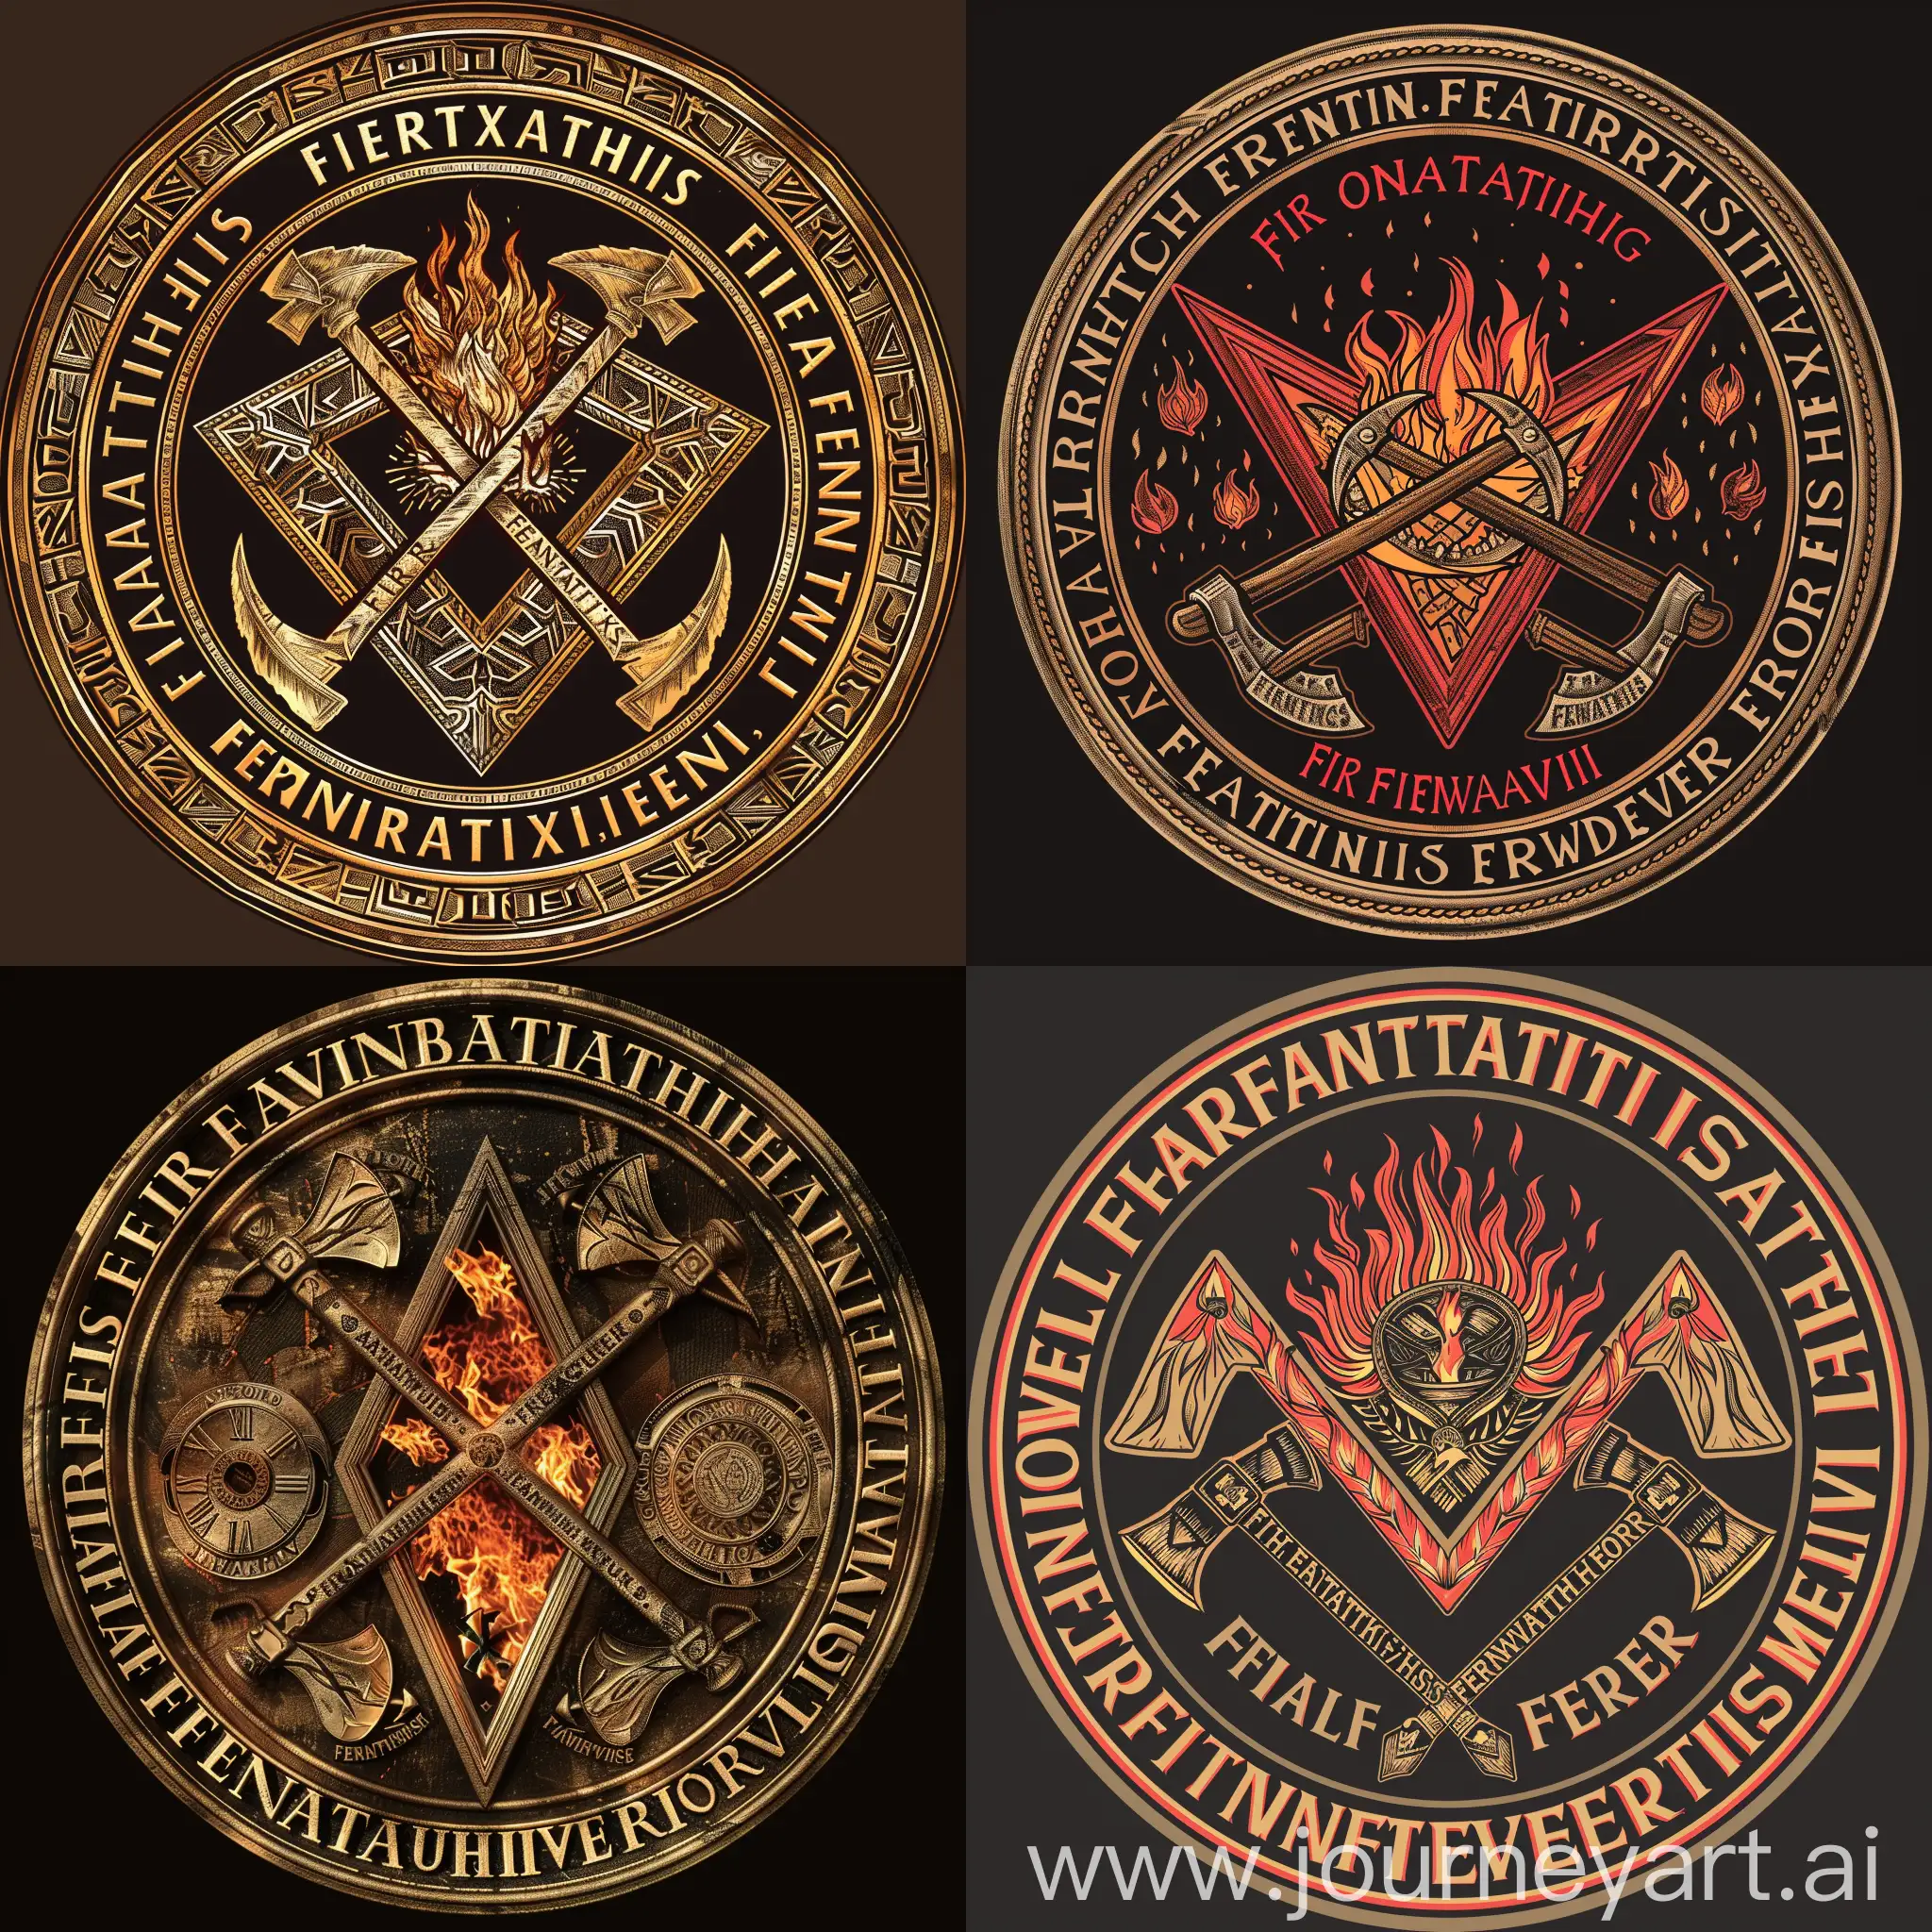 Fiery-Fire-Fanaticism-Emblem-with-Crossed-Axes